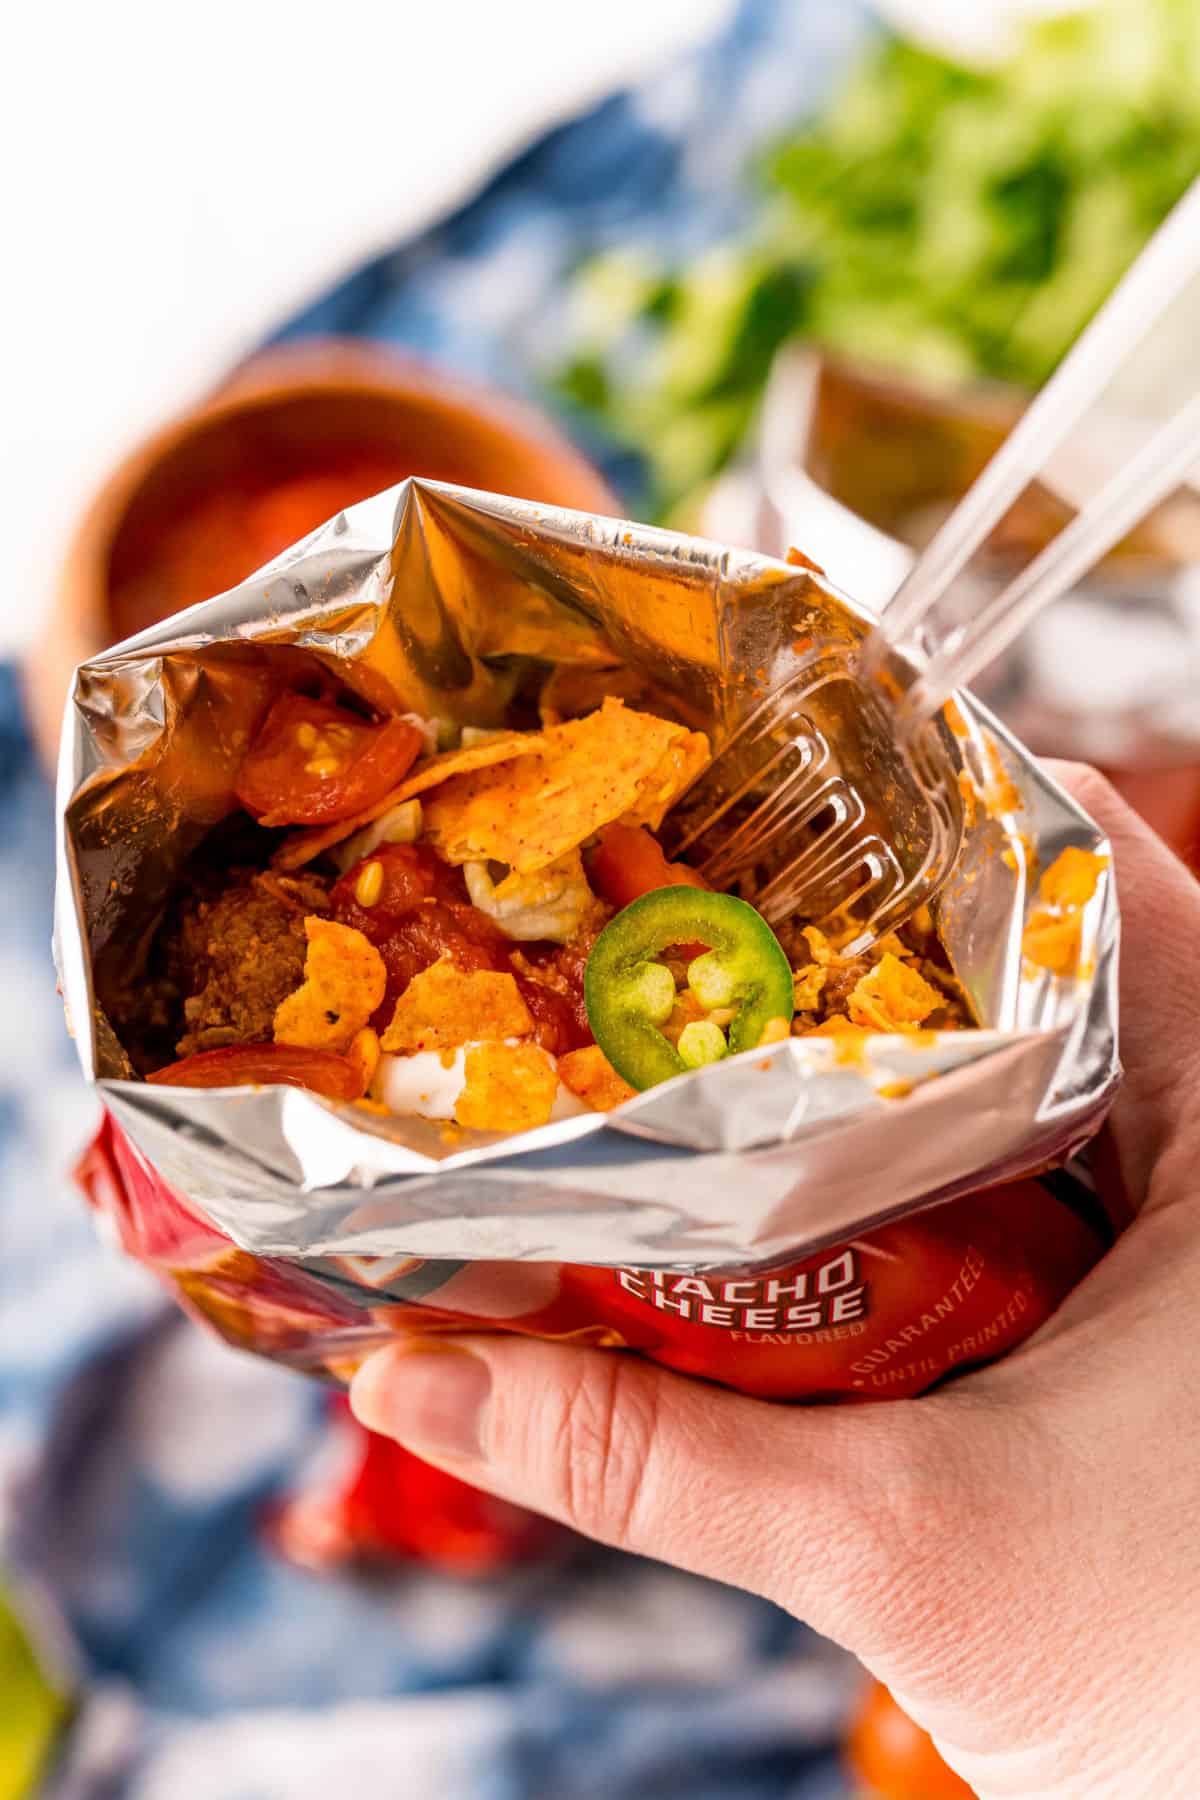 Dorito bag filled with chips, taco meat, and toppings. 